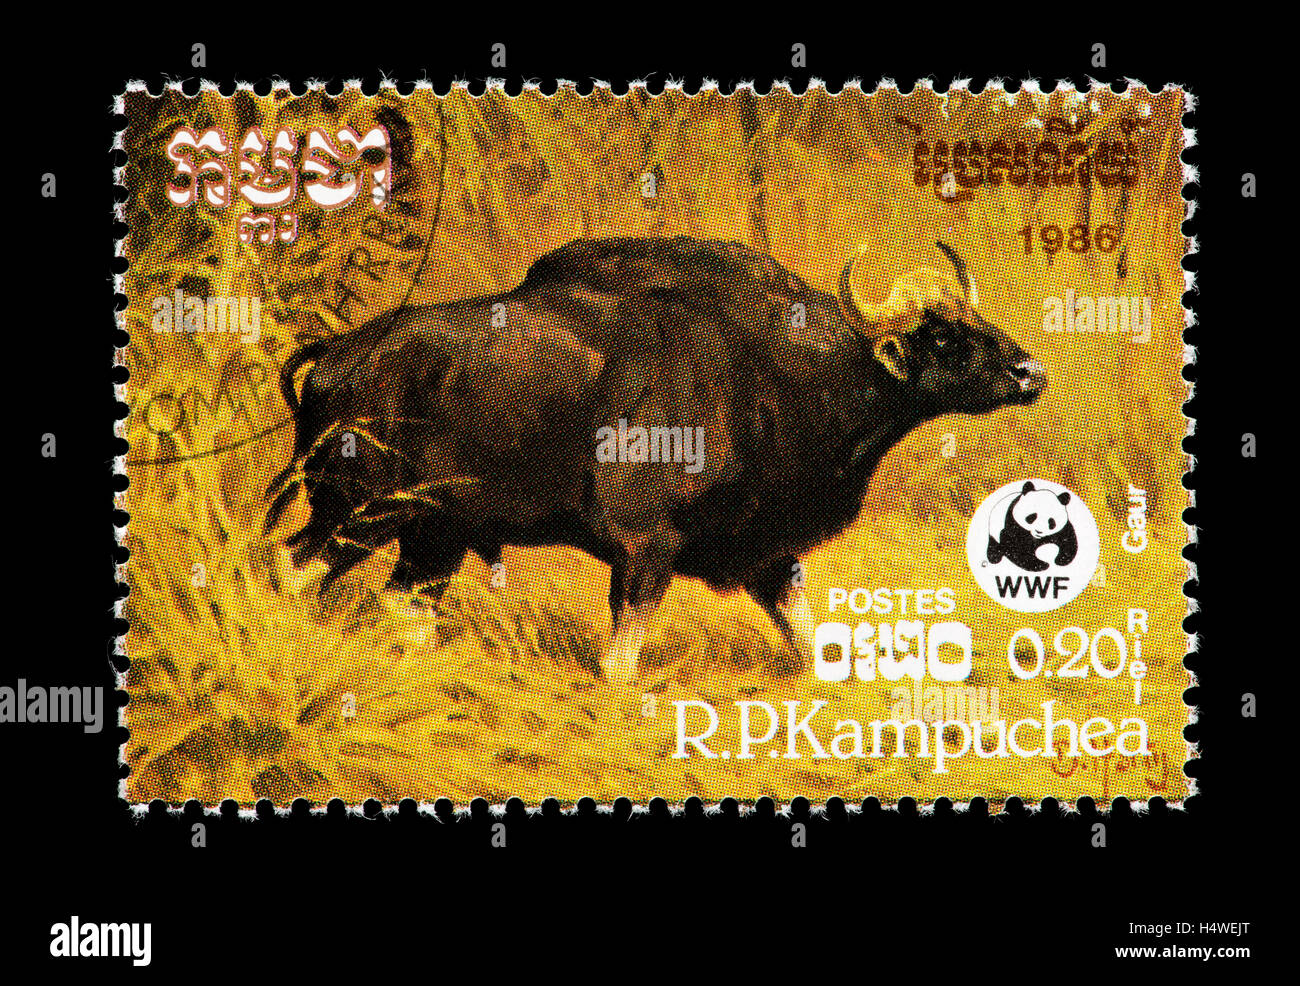 Postage stamp from Cambodia depicting a wild gaur. Stock Photo